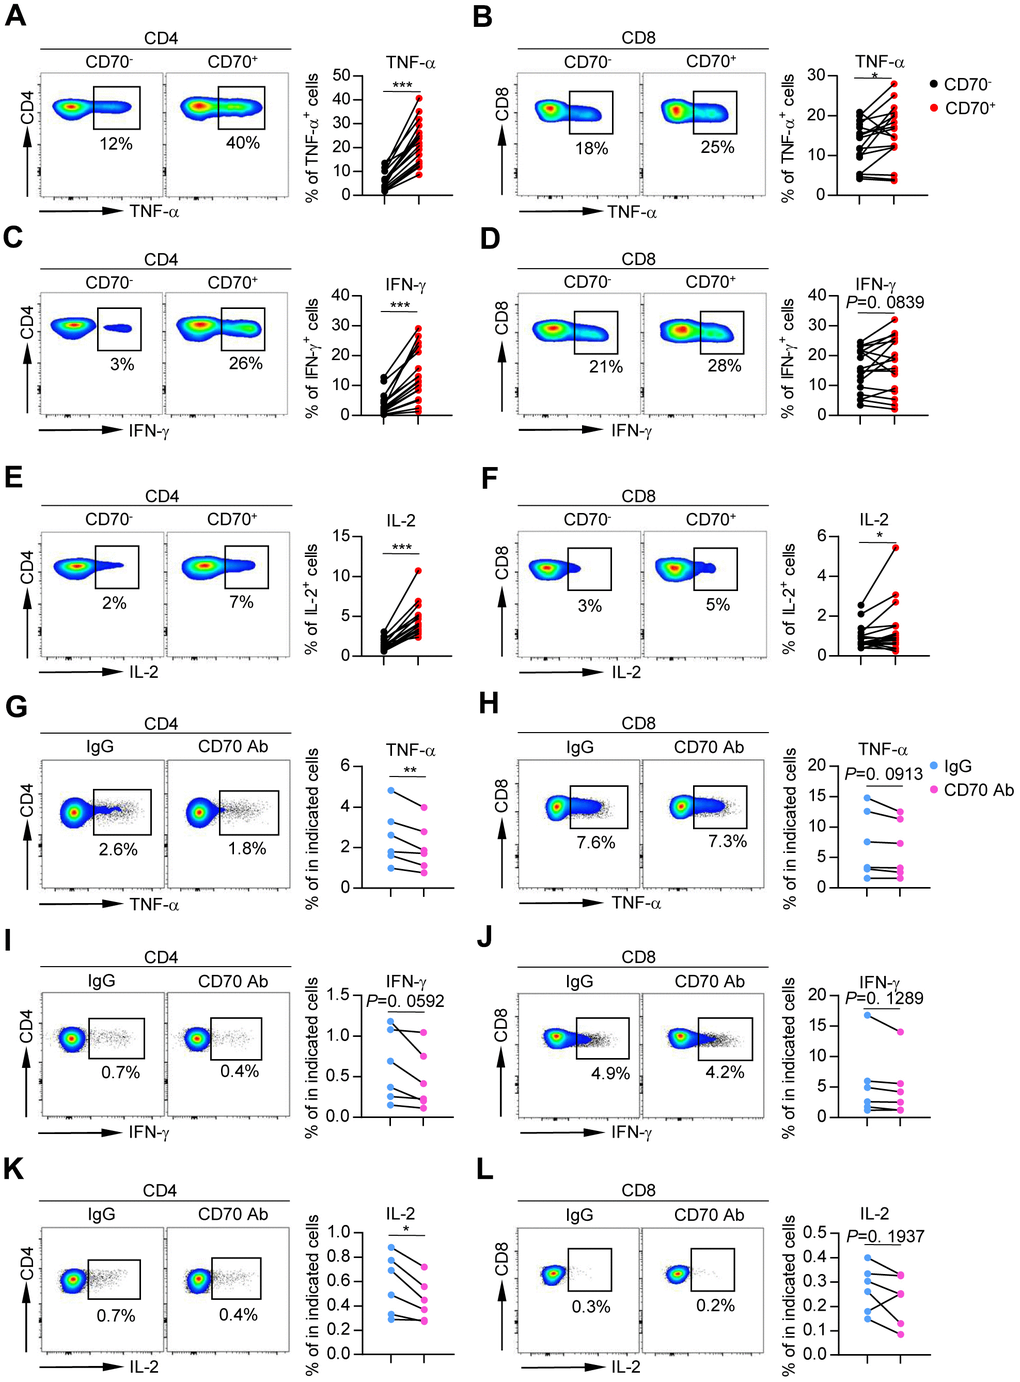 Aged CD70+ T cells secrete increased levels of inflammatory cytokines that can be reversed by blocking CD70. (A–F) Intracellular staining for TNF-α, IFN-γ, and IL-2 in CD70- and CD70+ T cells from elderly individuals (61-80 years, n = 17) after in vitro anti-CD3/anti-CD28 stimulation. Representative flow data (left) and plots (right) for TNF-α, IFN-γ, and IL-2, respectively. The p-values were obtained by paired t-test (TNF-α, IFN-γ [CD8+ T cells], IL-2 [CD4+ T cells]) or Wilcoxon matched-pairs signed rank test (IFN-γ [CD4+ T cells], IL-2 [CD8+ T cells]). (G–L) Purified CD4+ and CD8+ T cells from healthy individuals (n = 6) were cultured with antagonist anti-CD70 antibody or IgG at a concentration of 10 μg/mL as indicated. After culturing in vitro for 24 h and stimulating with anti-CD3/anti-CD28, the cytokine production was measured by flow cytometry. Representative histogram (left) and plot (right) of TNF-α, IFN-γ, and IL-2 expression in CD4+ and CD8+ T cells. The p-values were obtained by paired t-test. *p p p 